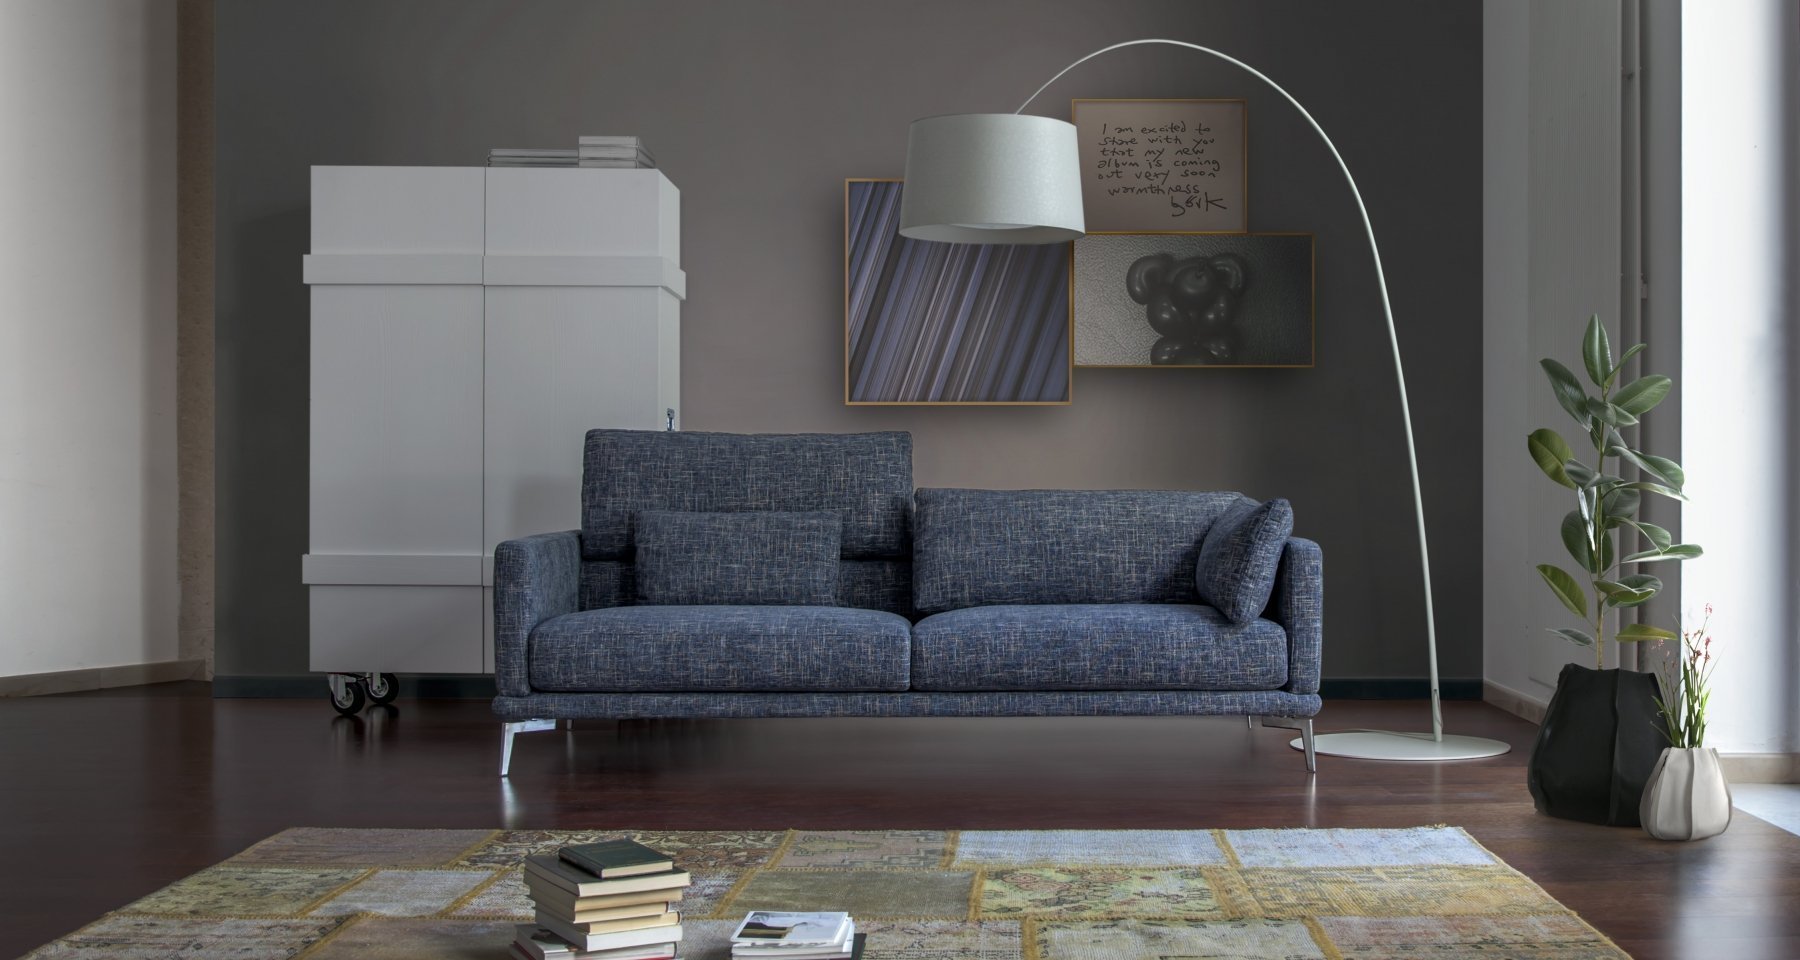 The Genius Loci, also available in a chaise-longue configuration, features a stylish shape, further enhanced by slender armrests and elegant feet